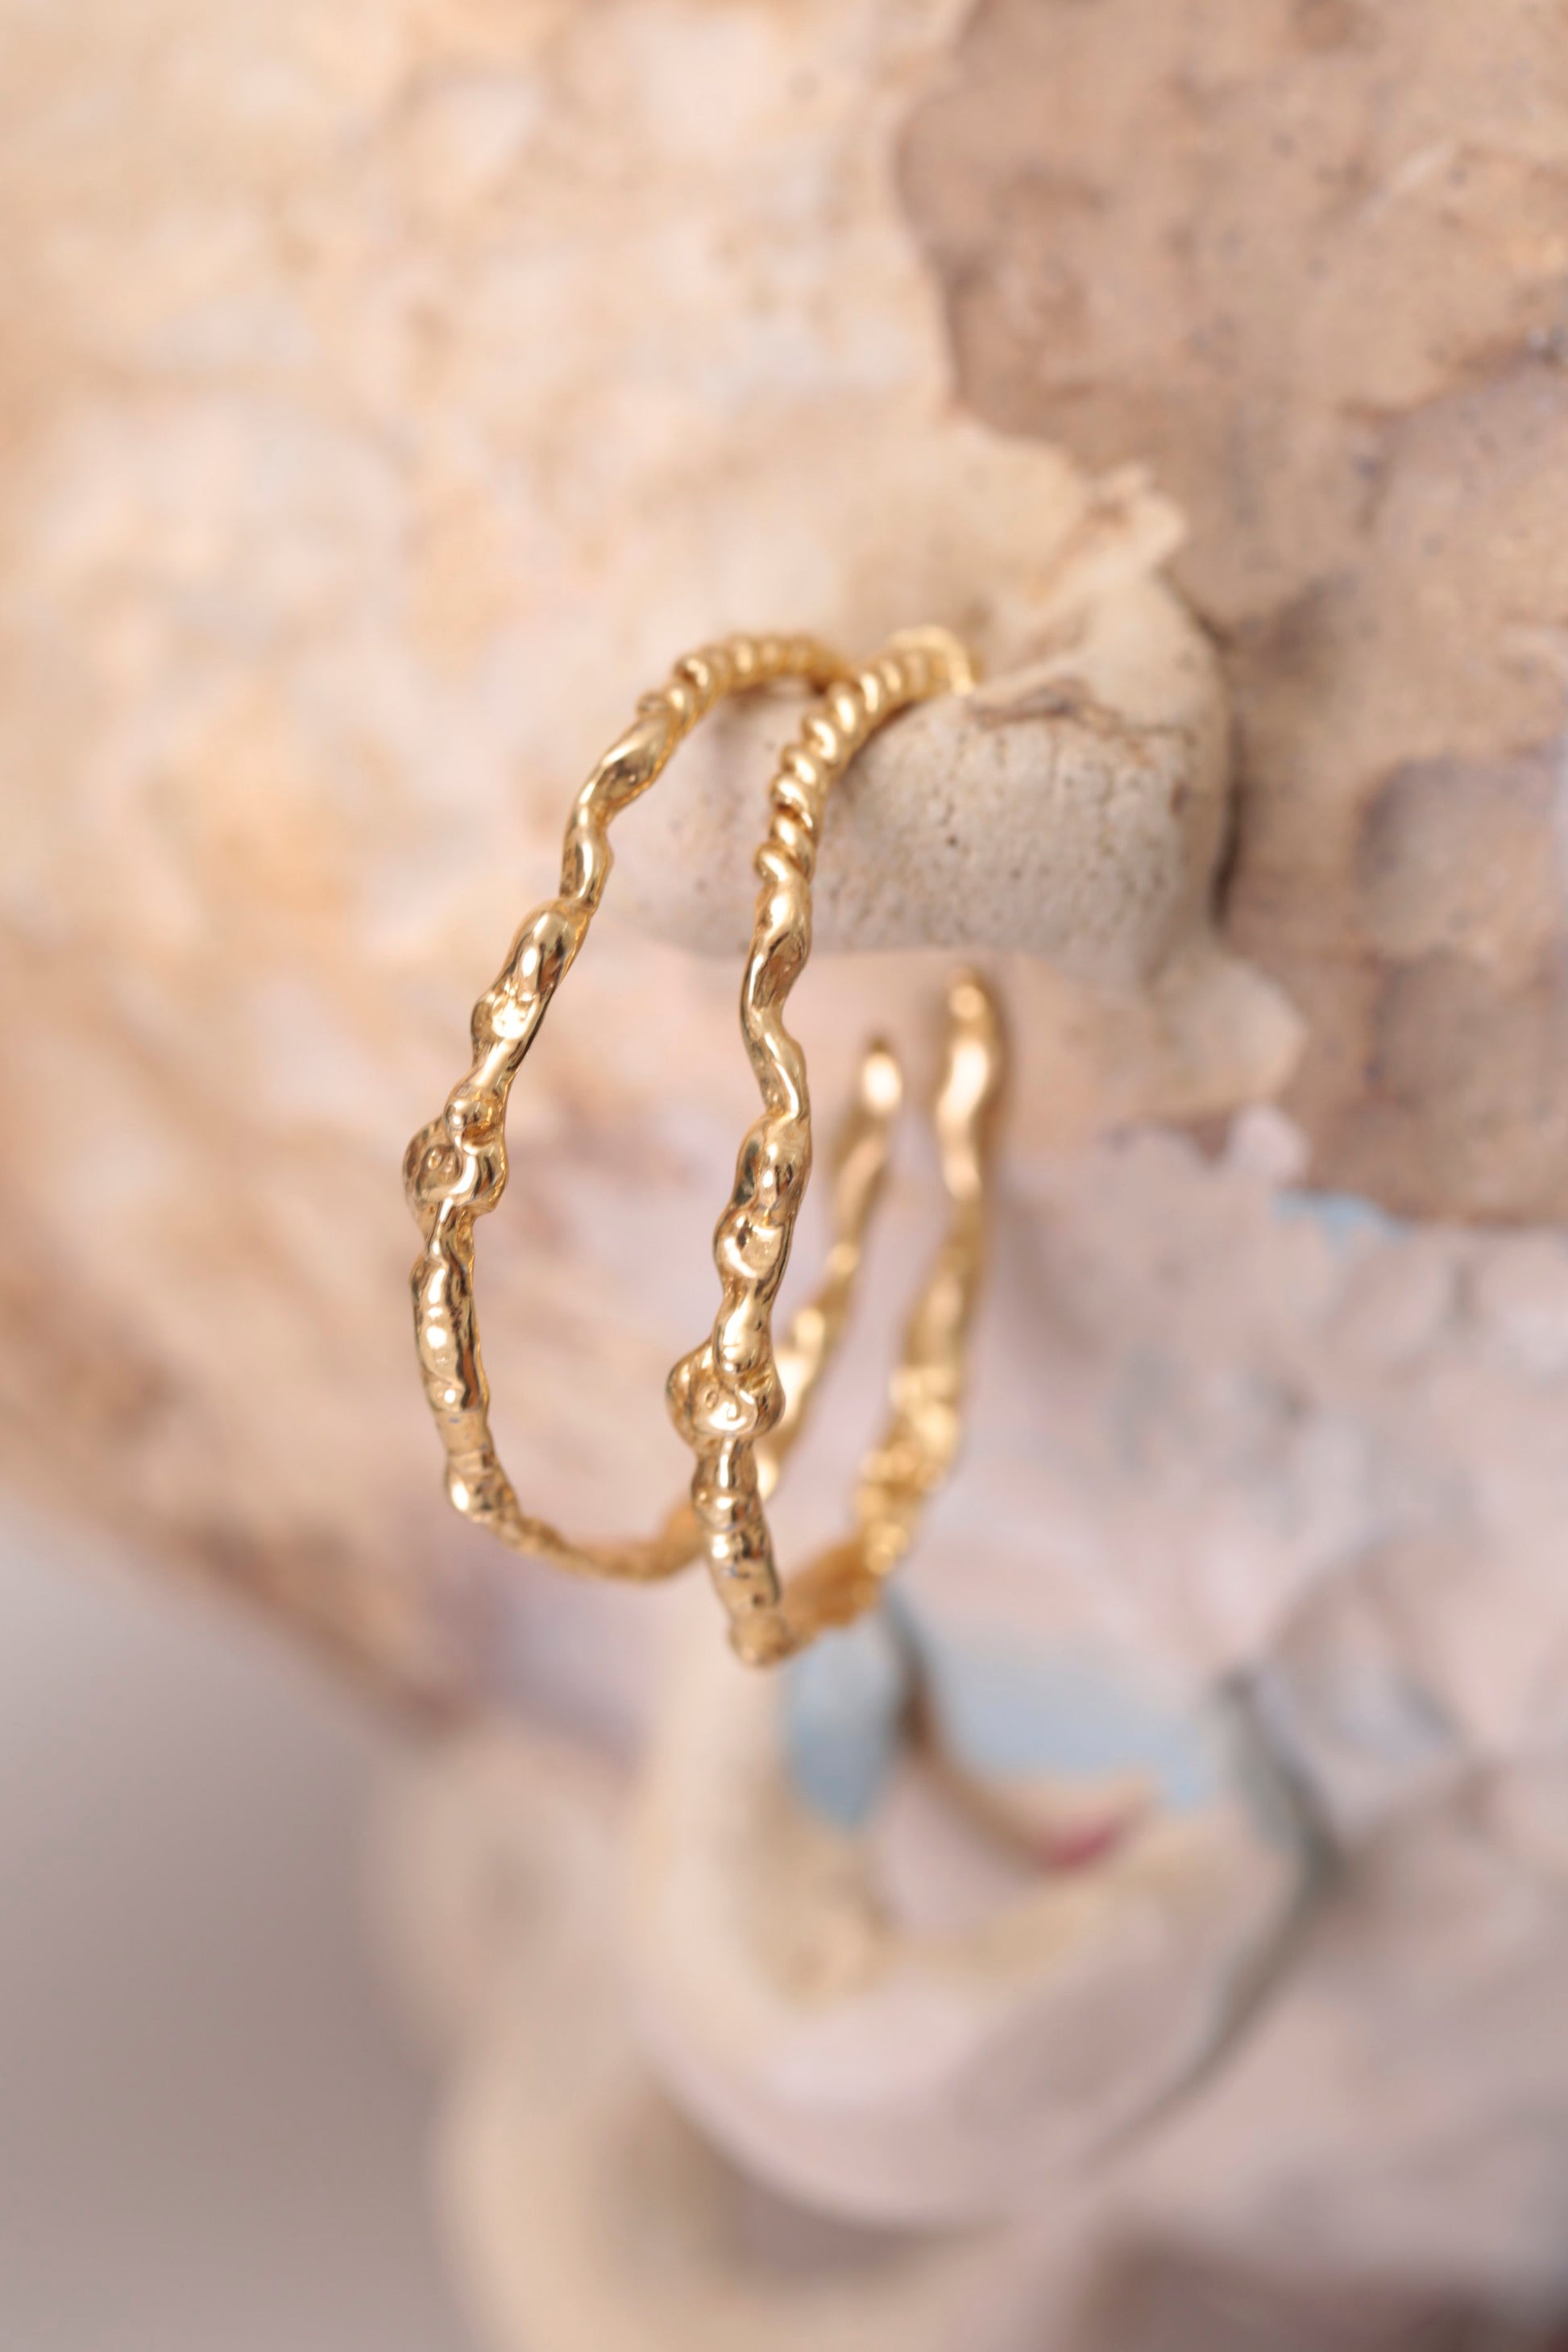 ¾ View of CLARK Sea Siren Hoop earrings, clear impressions of seashells and seafloor treasures are highlighted. These one-of-a-kind statement earrings are made using the lost wax casting method by an artist in Brooklyn. 